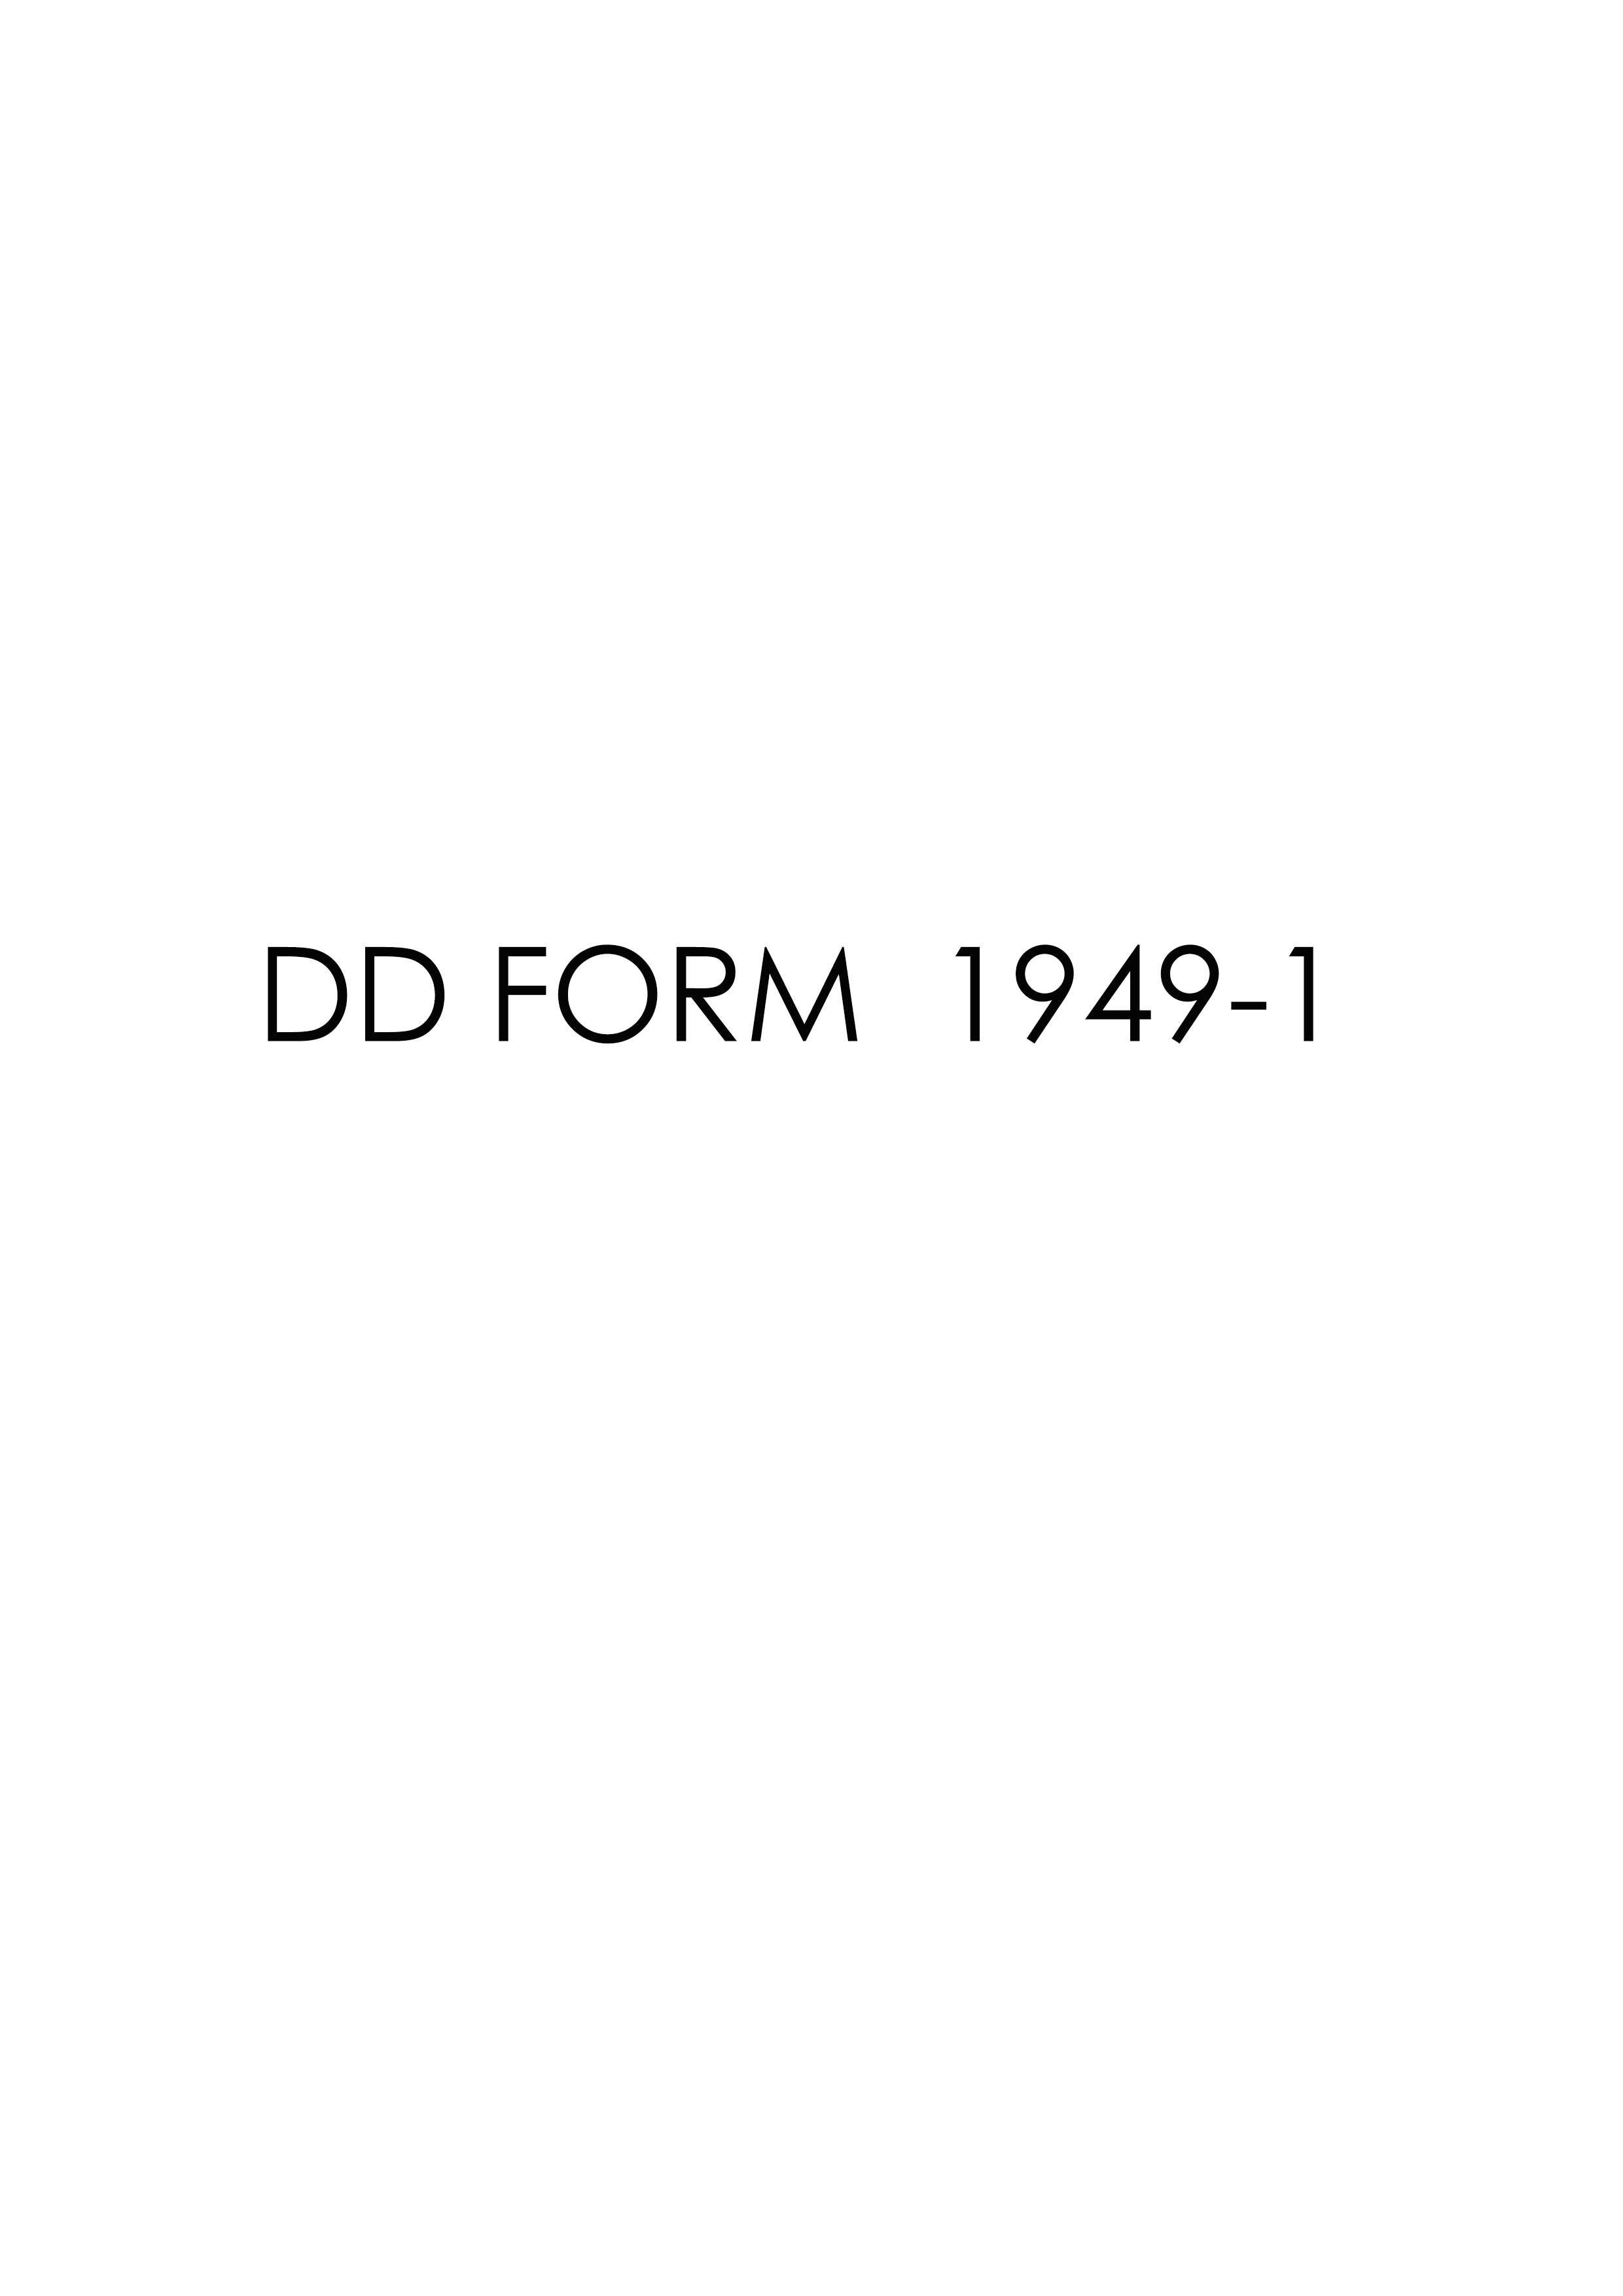 Download Fillable dd Form 1949-1